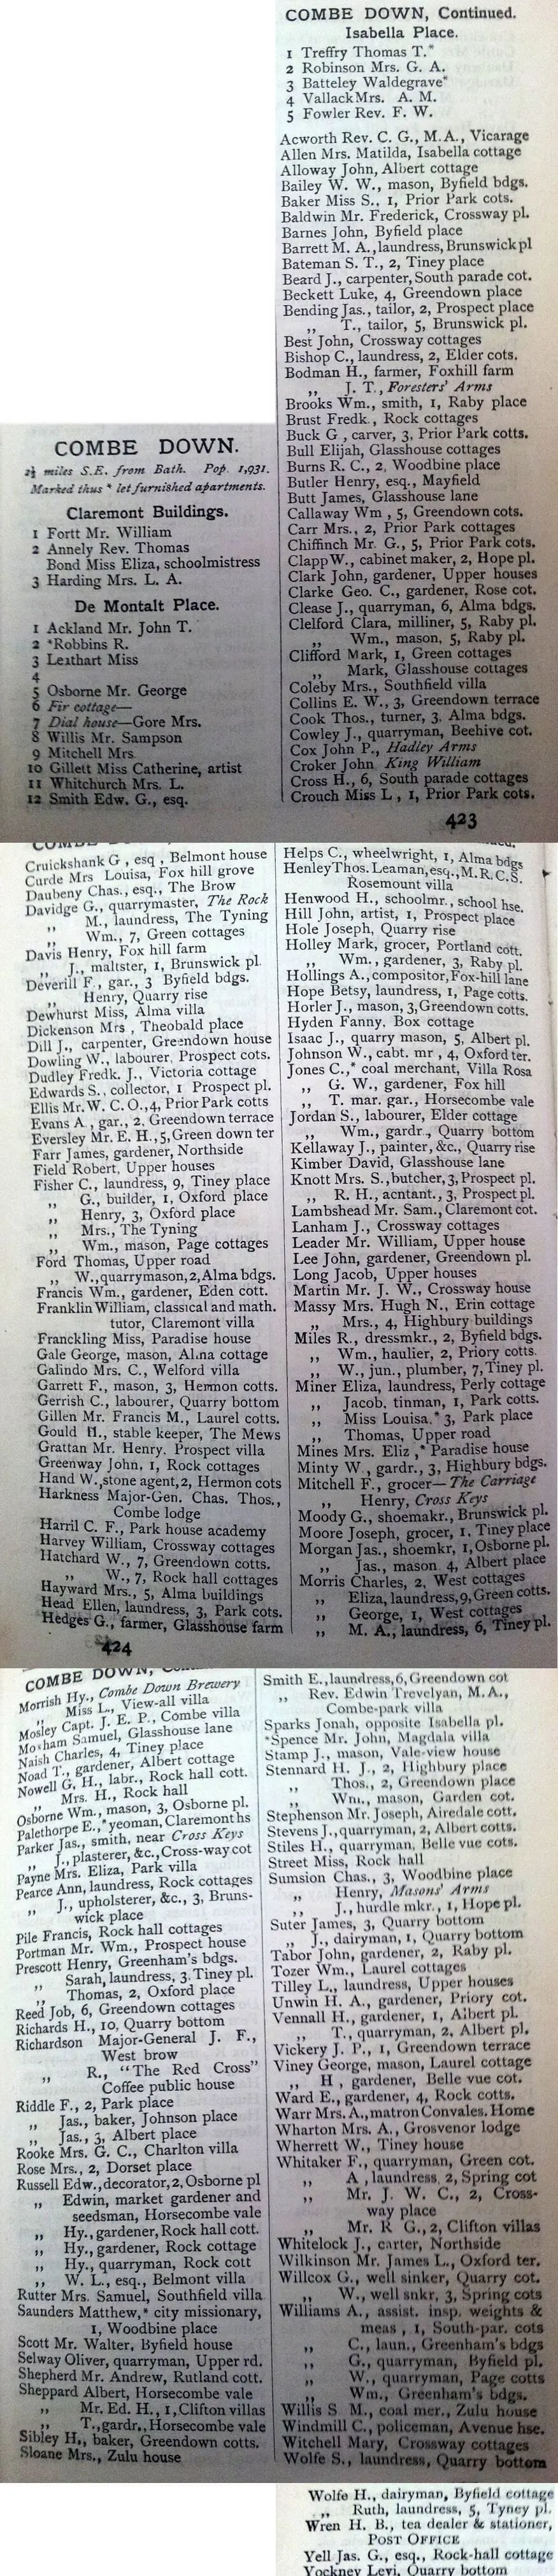 1880 post office directory for combe down